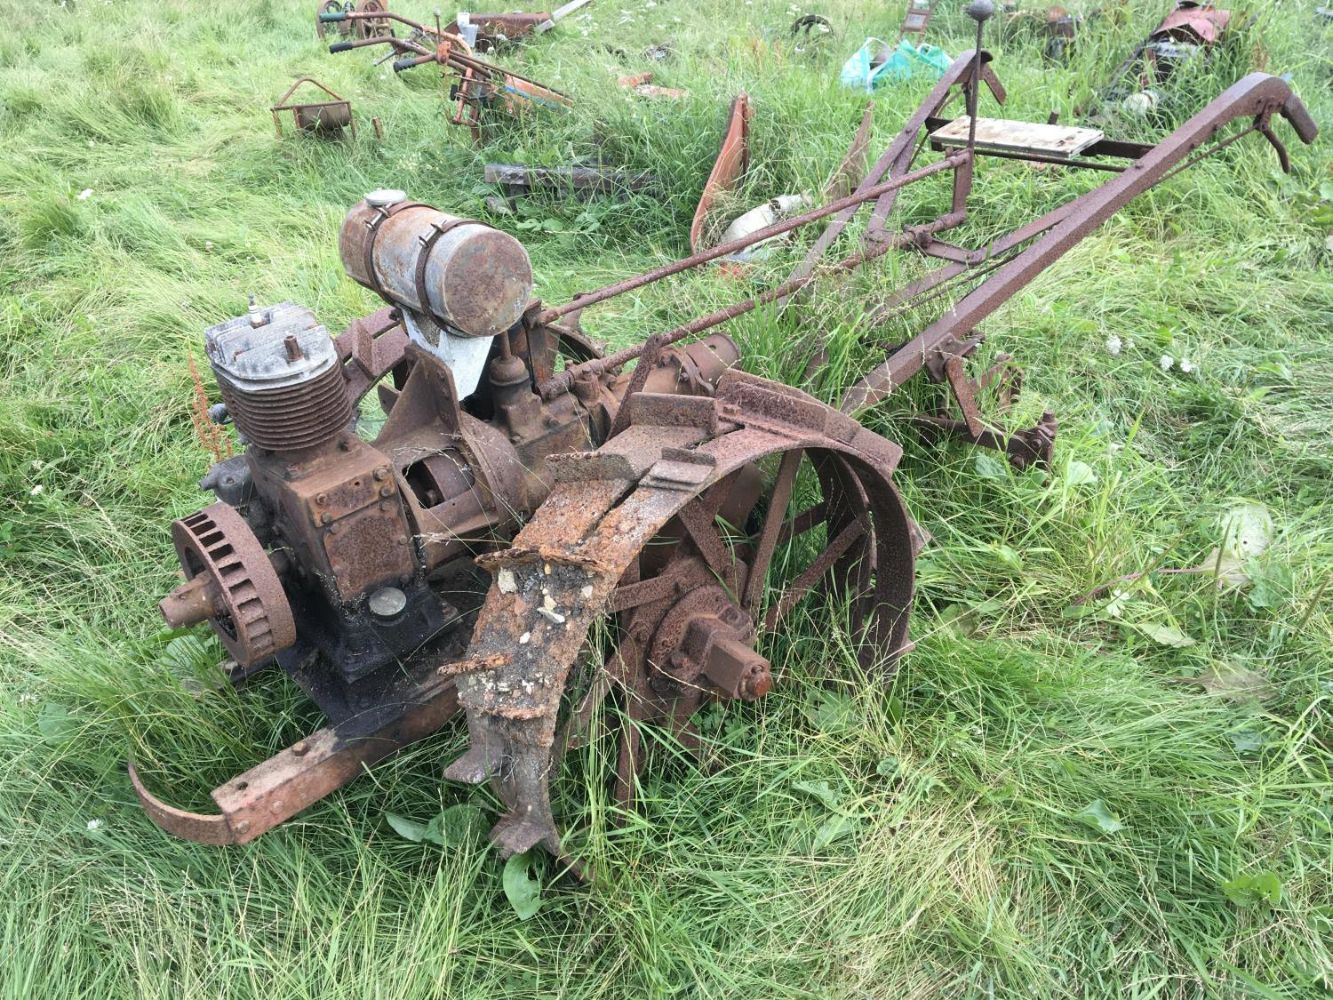 Vintage cycles and small agricultural tractors for restoration